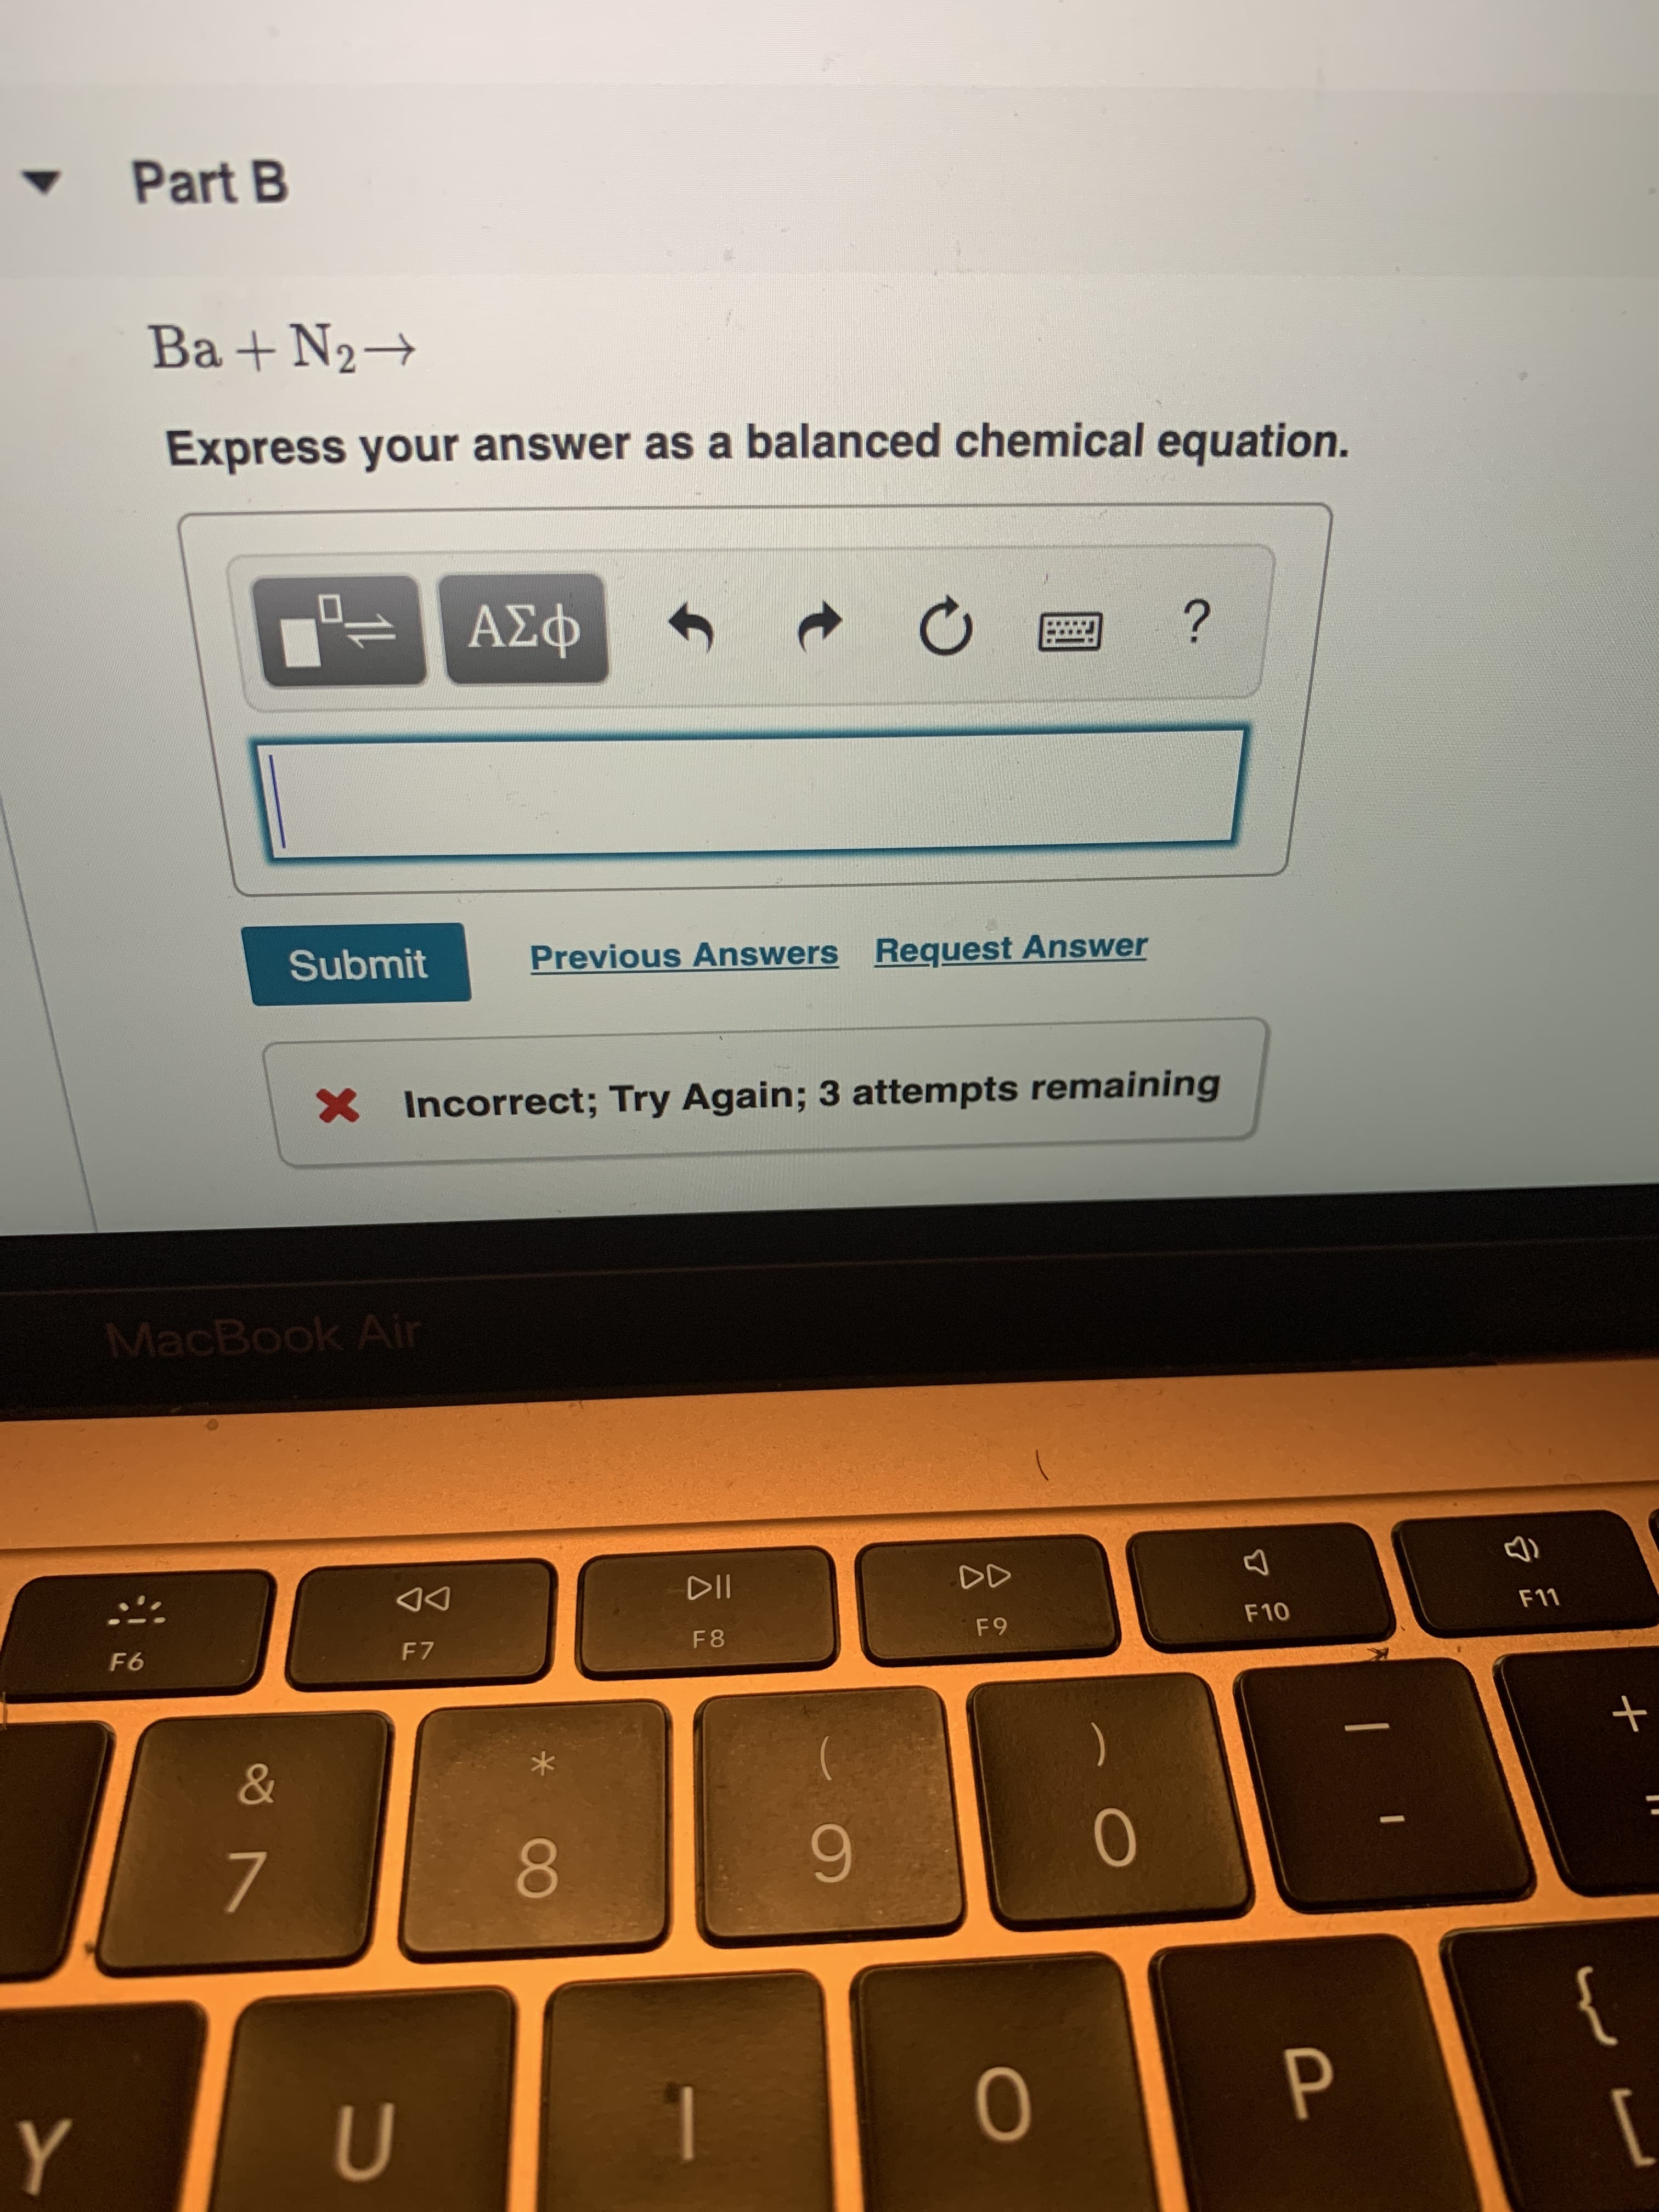 Part B
Ba+N2
Express your answer as a balanced chemical equation.
ΑΣφ
?
Previous Answers Request Answer
Submit
Incorrect; Try Again; 3 attempts remaining
MacBook Air
DD
DII
F11
F10
F 9
F 8
F 7
F6
+
&
7
{
Y
OP
